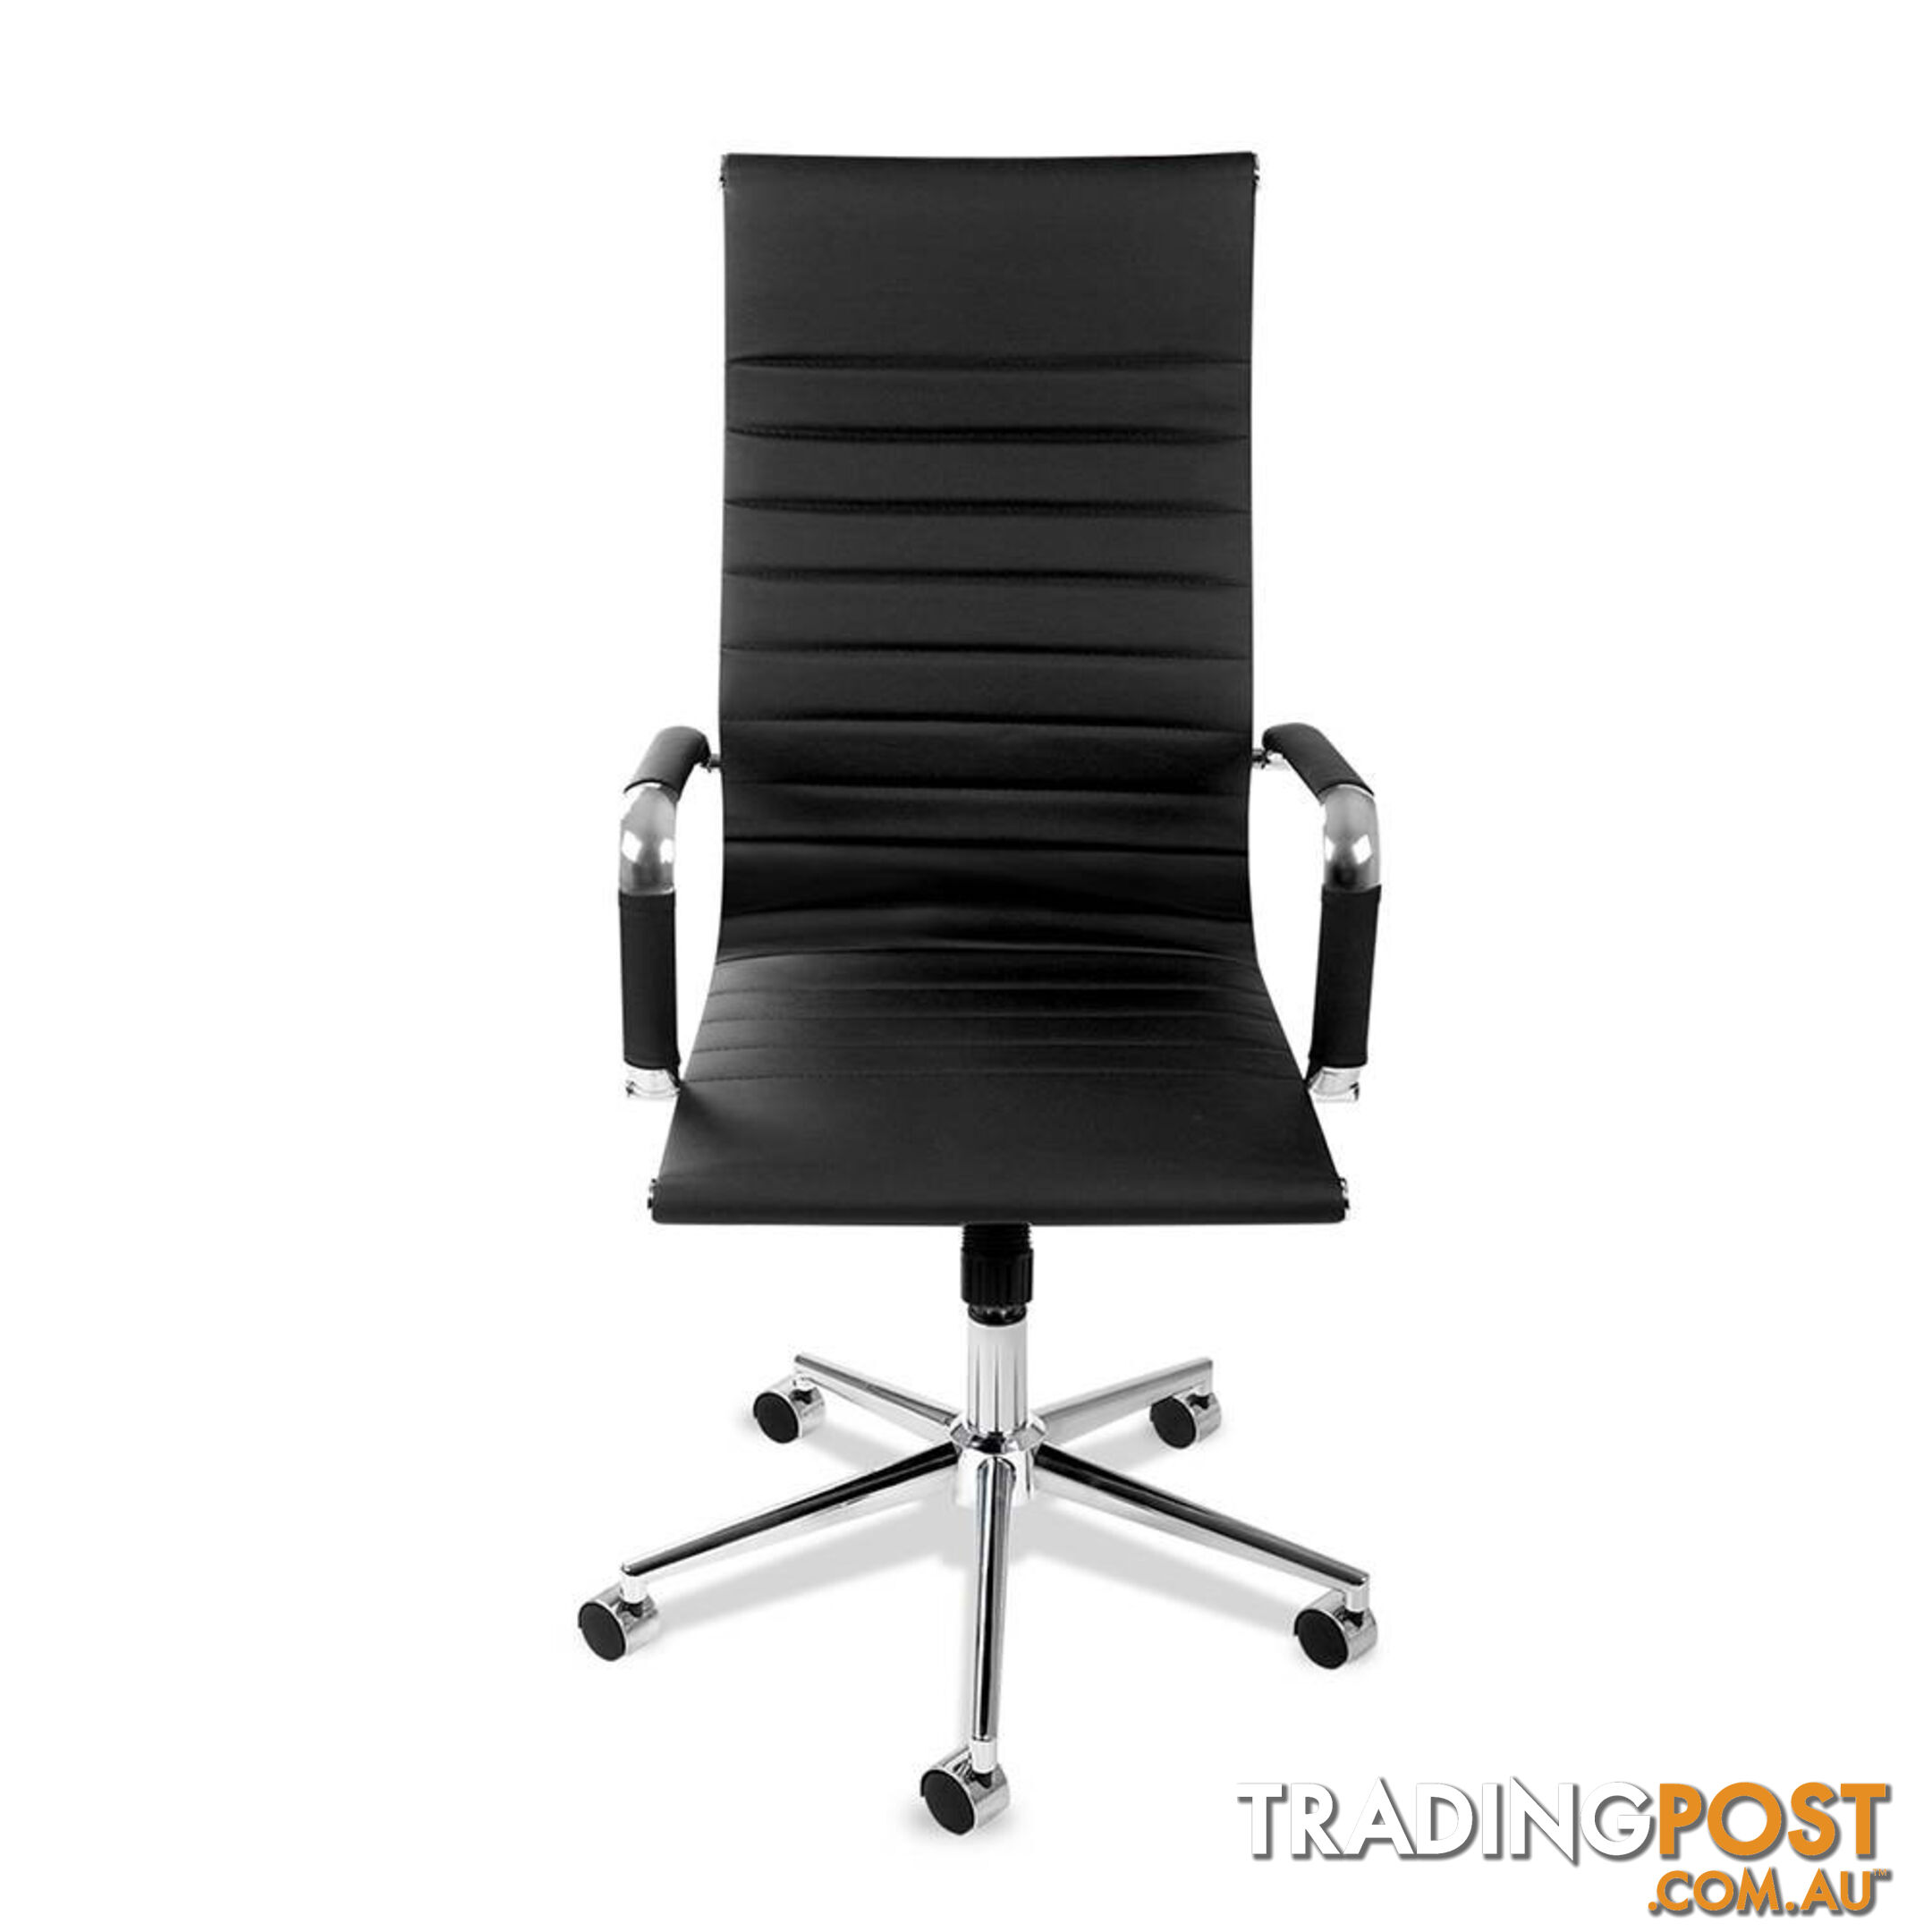 Eames Replica PU Leather High Back Executive Computer Office Chair Black